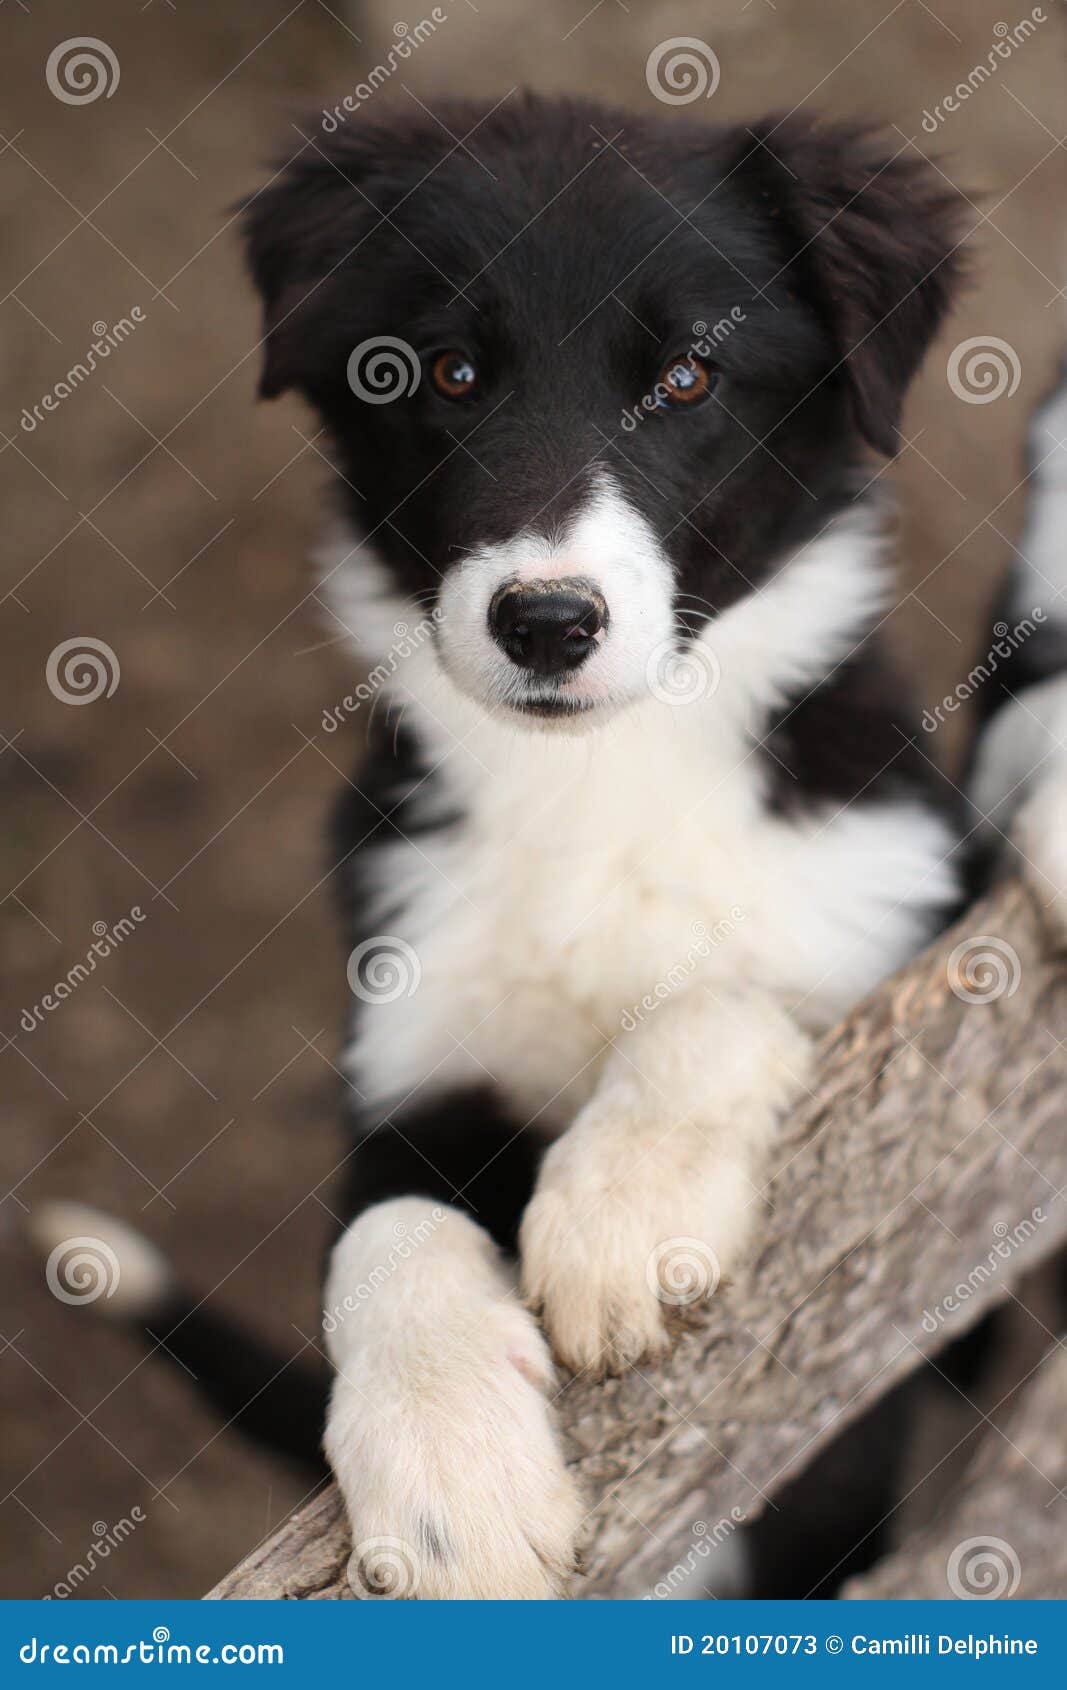 Cute Black And White Puppy Dog Stock Photos - Image: 20107073